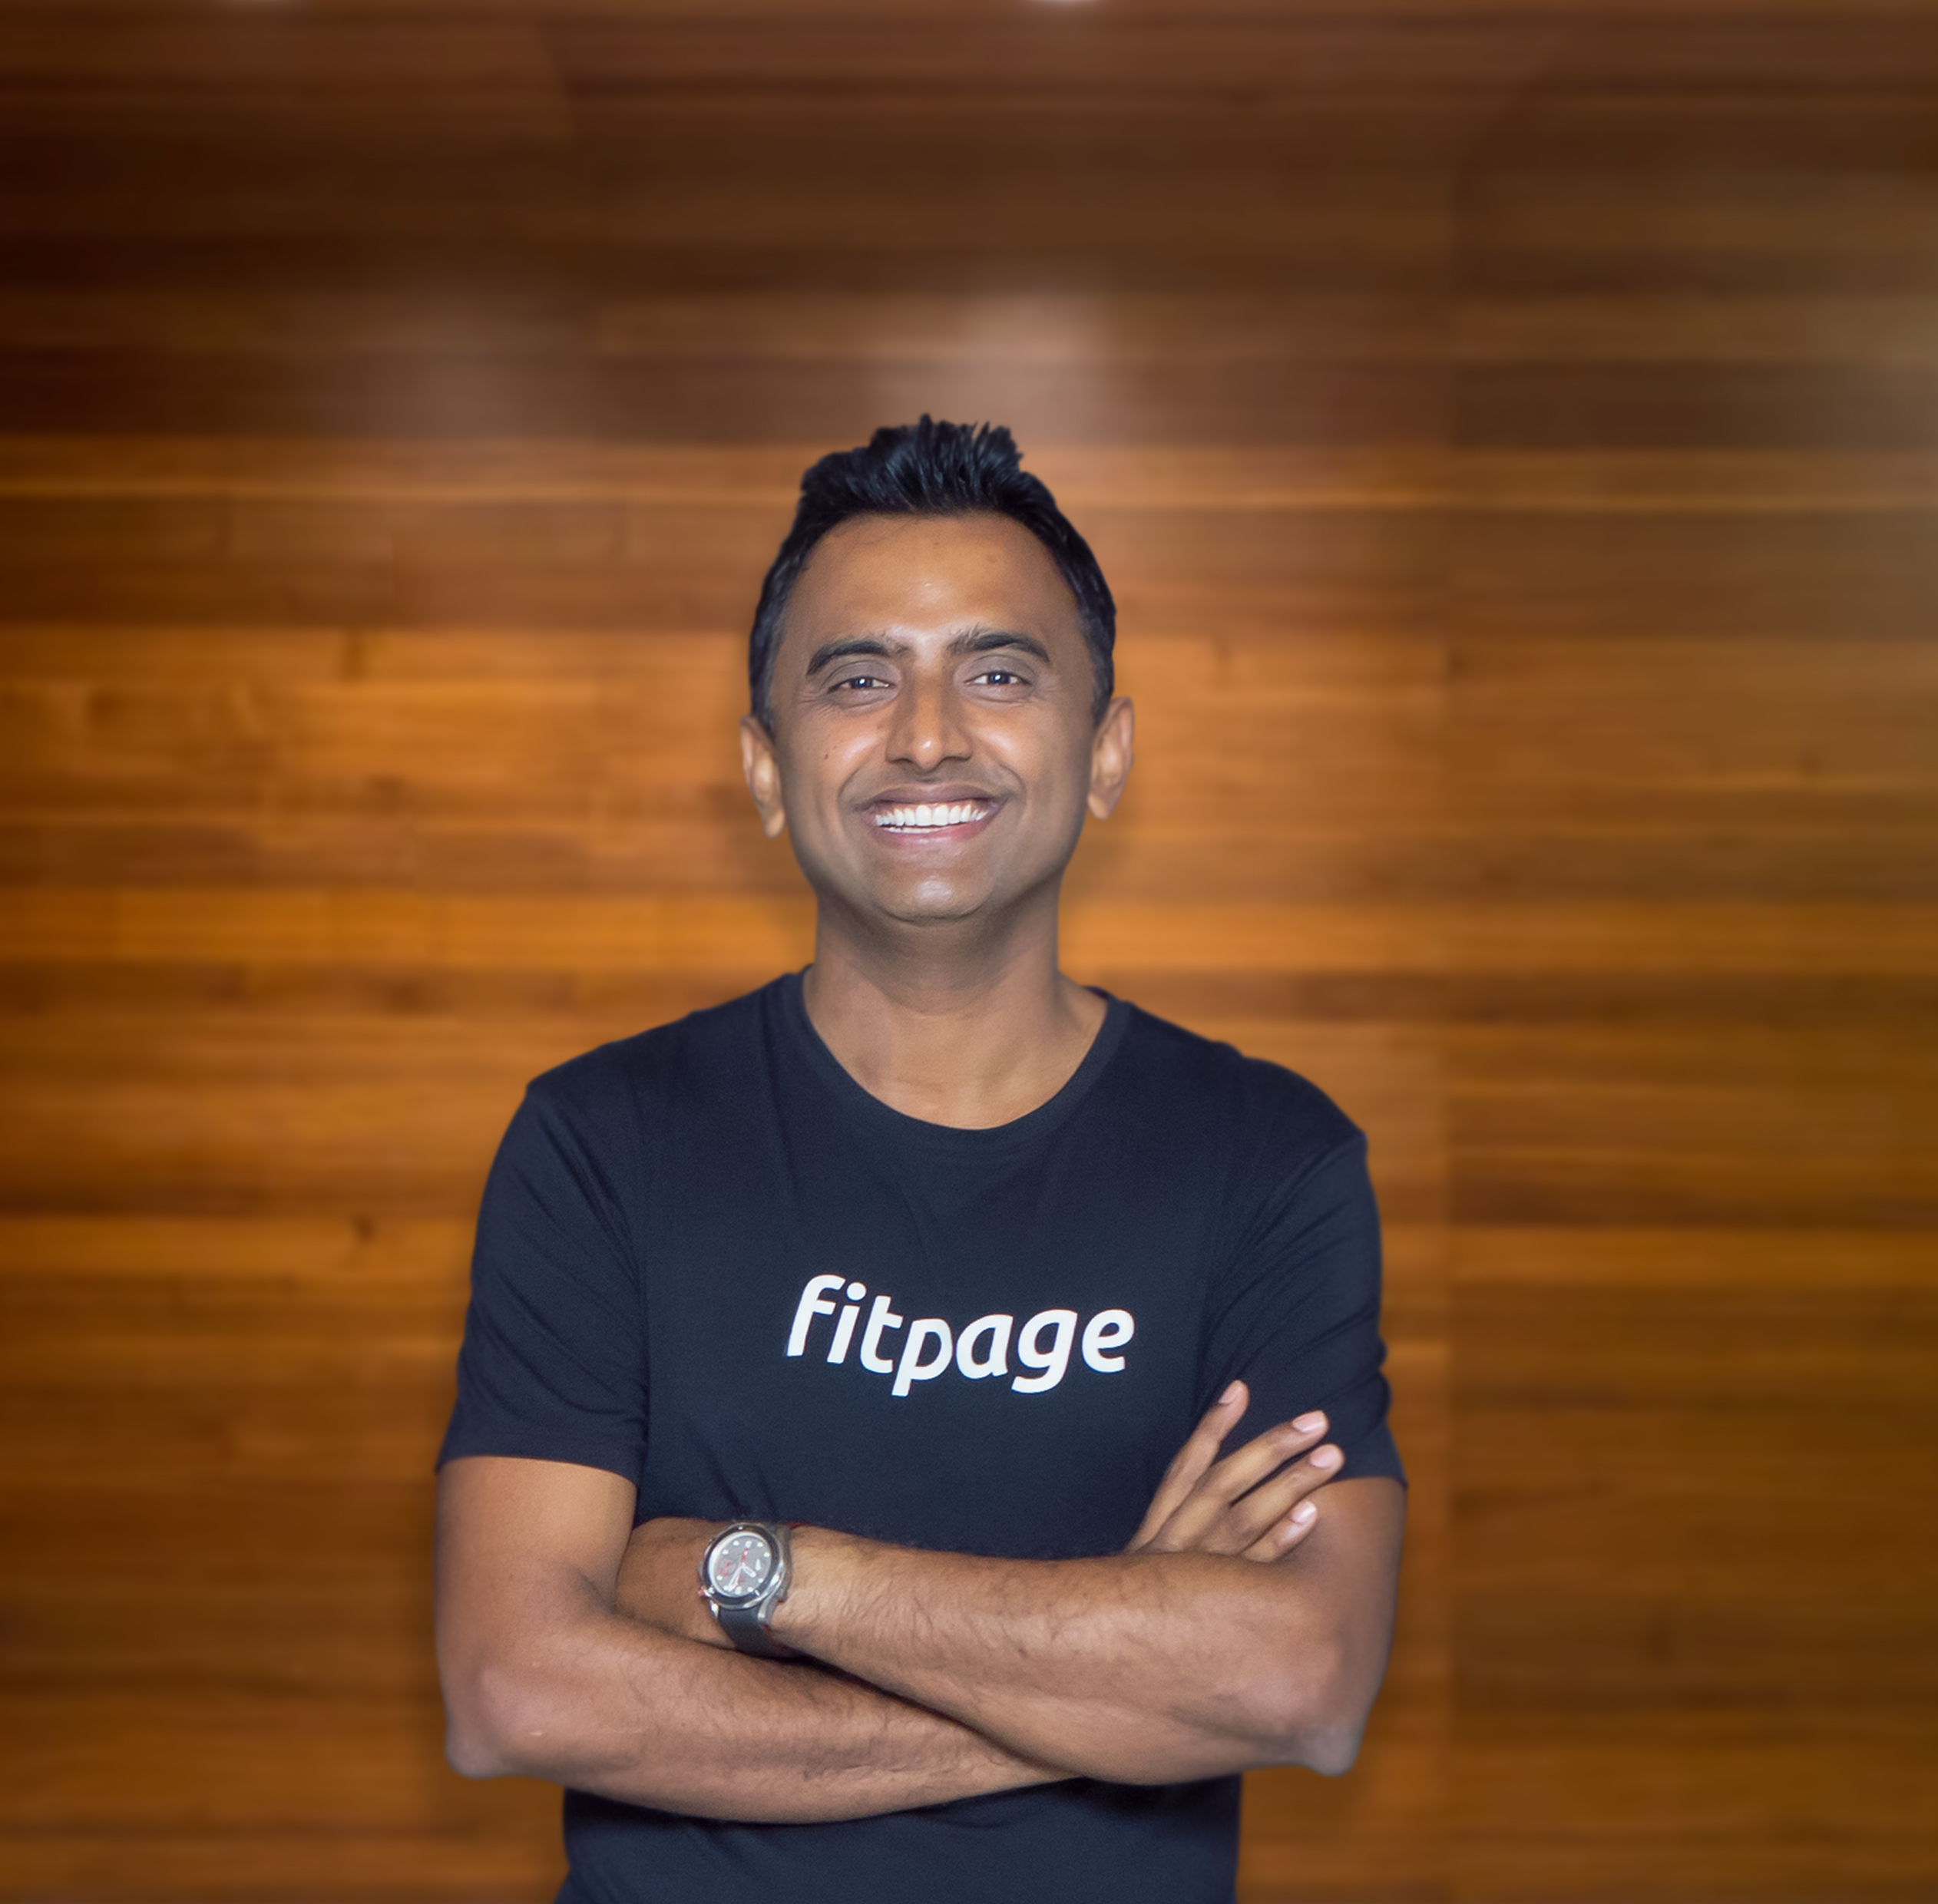 Fitness-tech start-up fitpage acquires India Running for an undisclosed amount